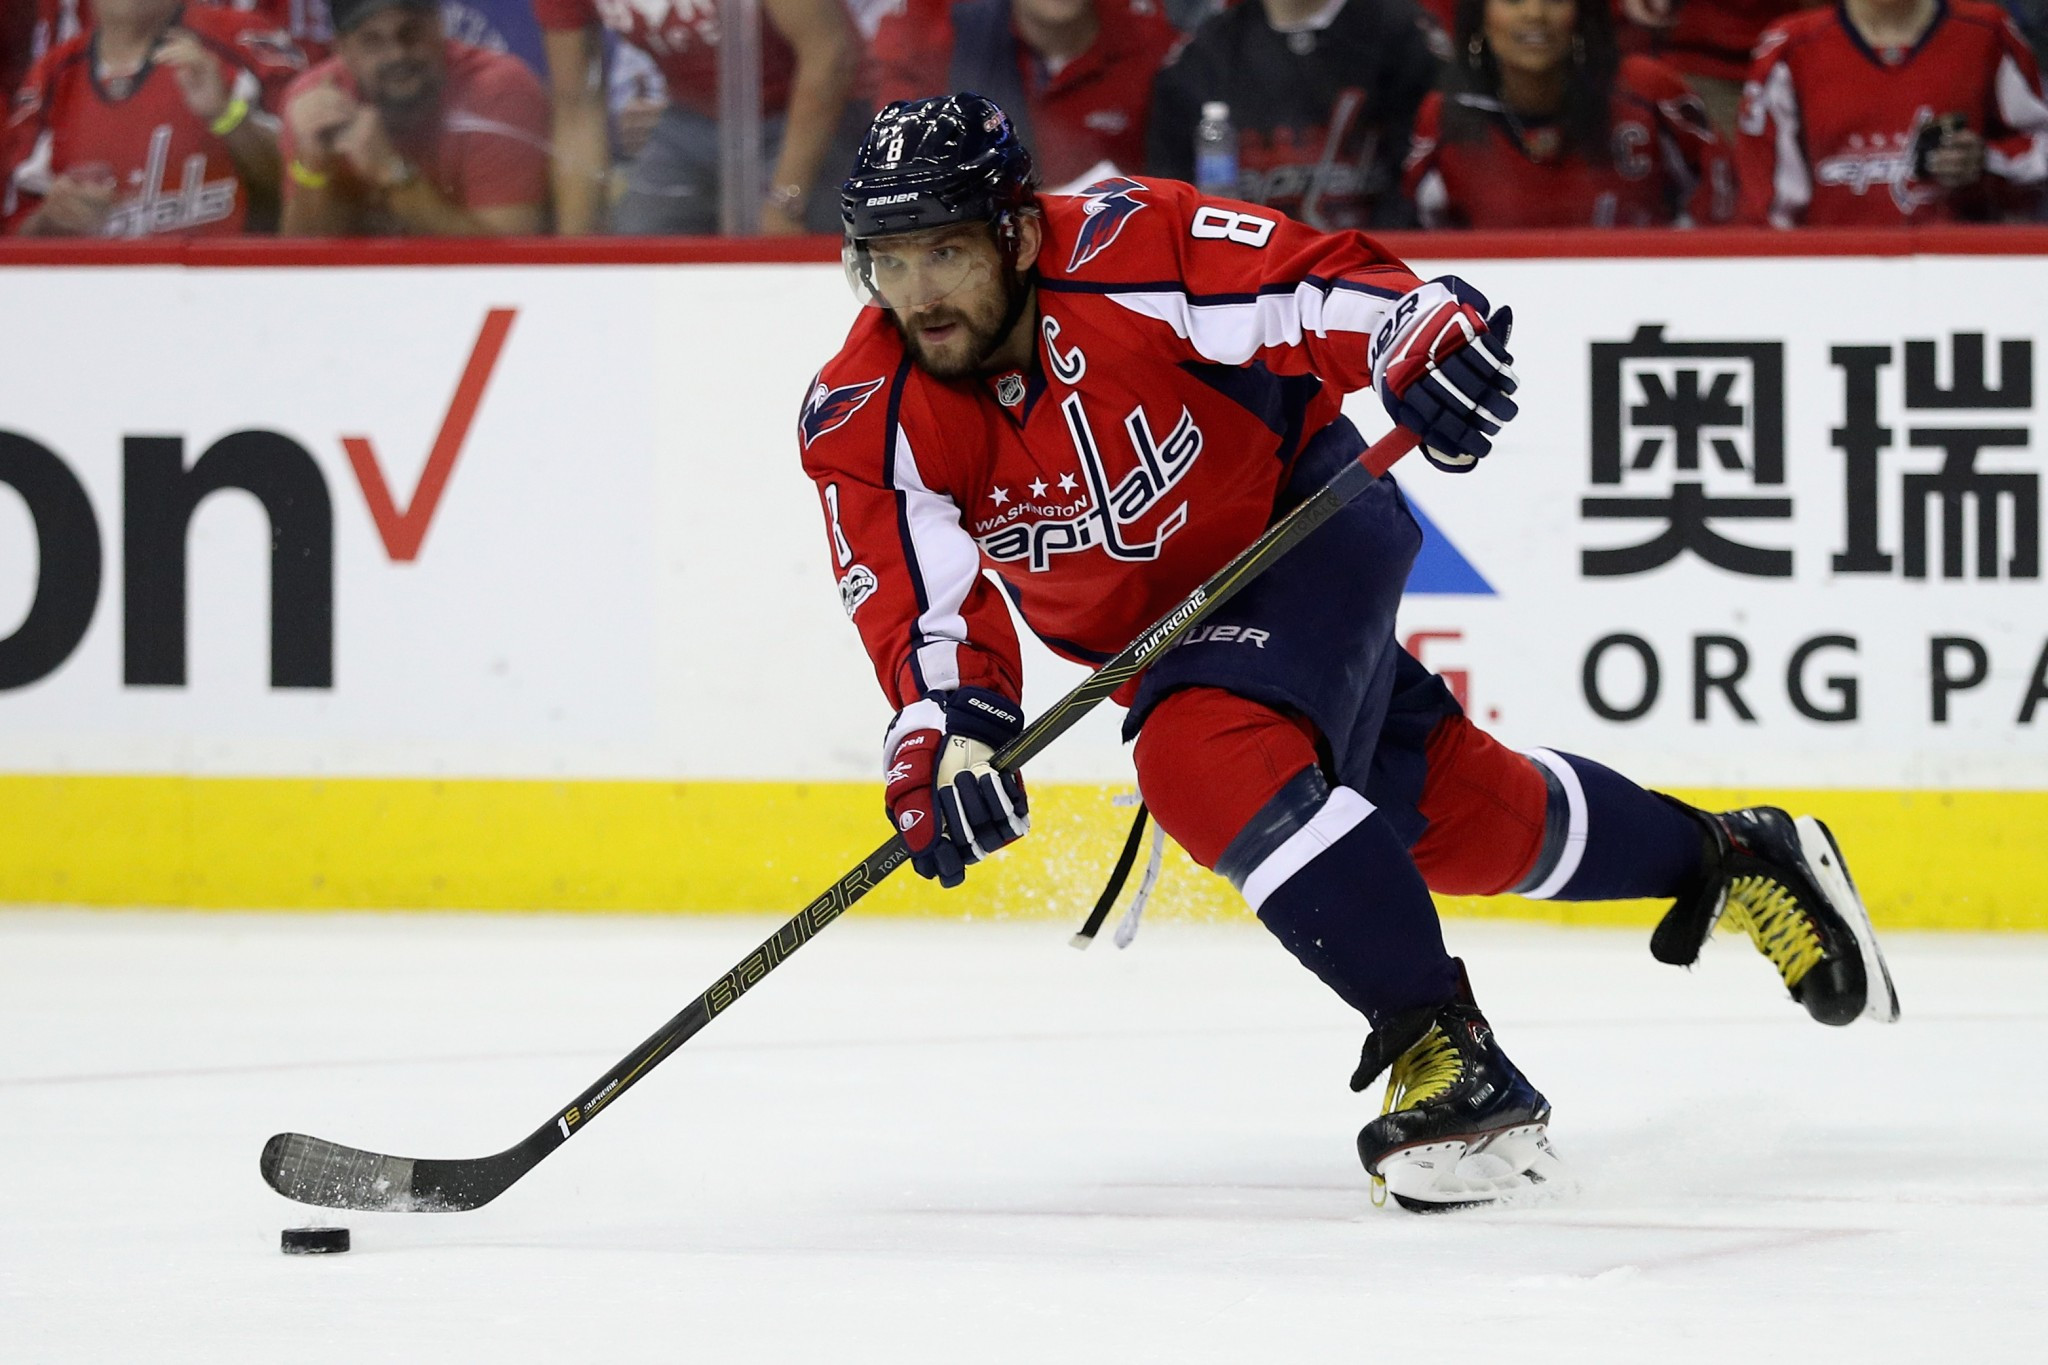 Winter Olympics: After past failures, Alex Ovechkin looks to